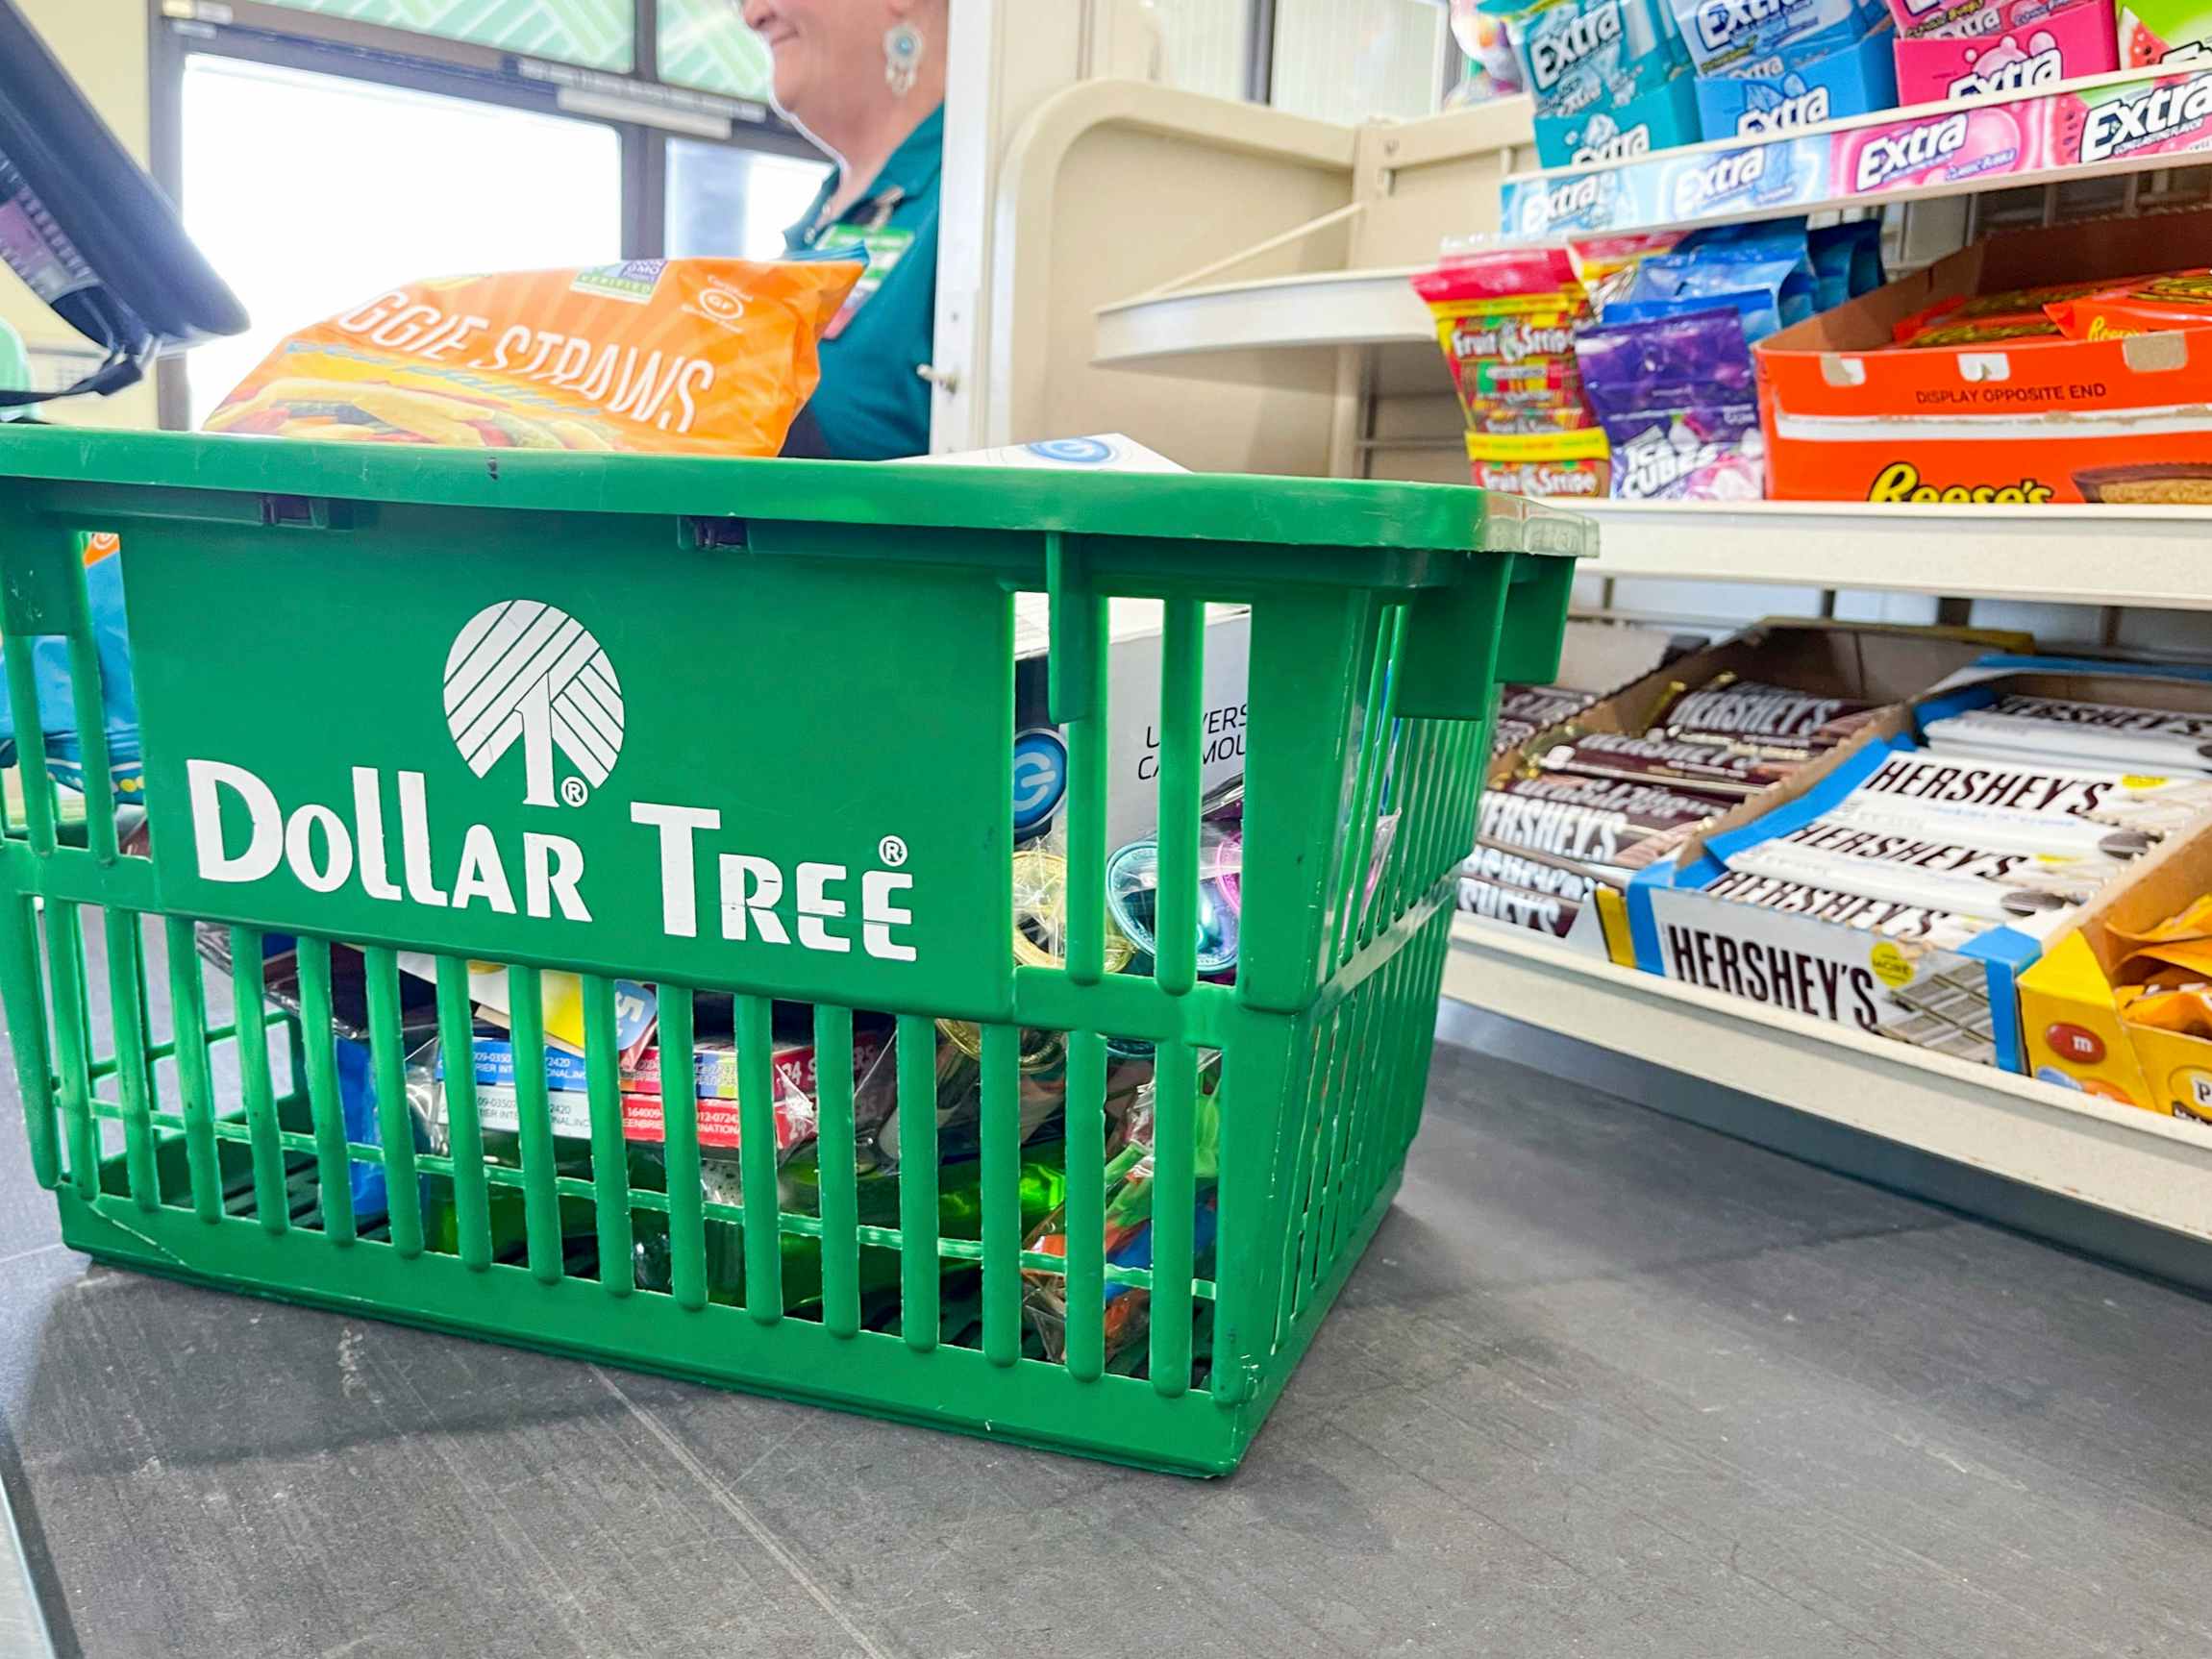 A shopping basket on a checkout conveyer belt at Dollar Tree